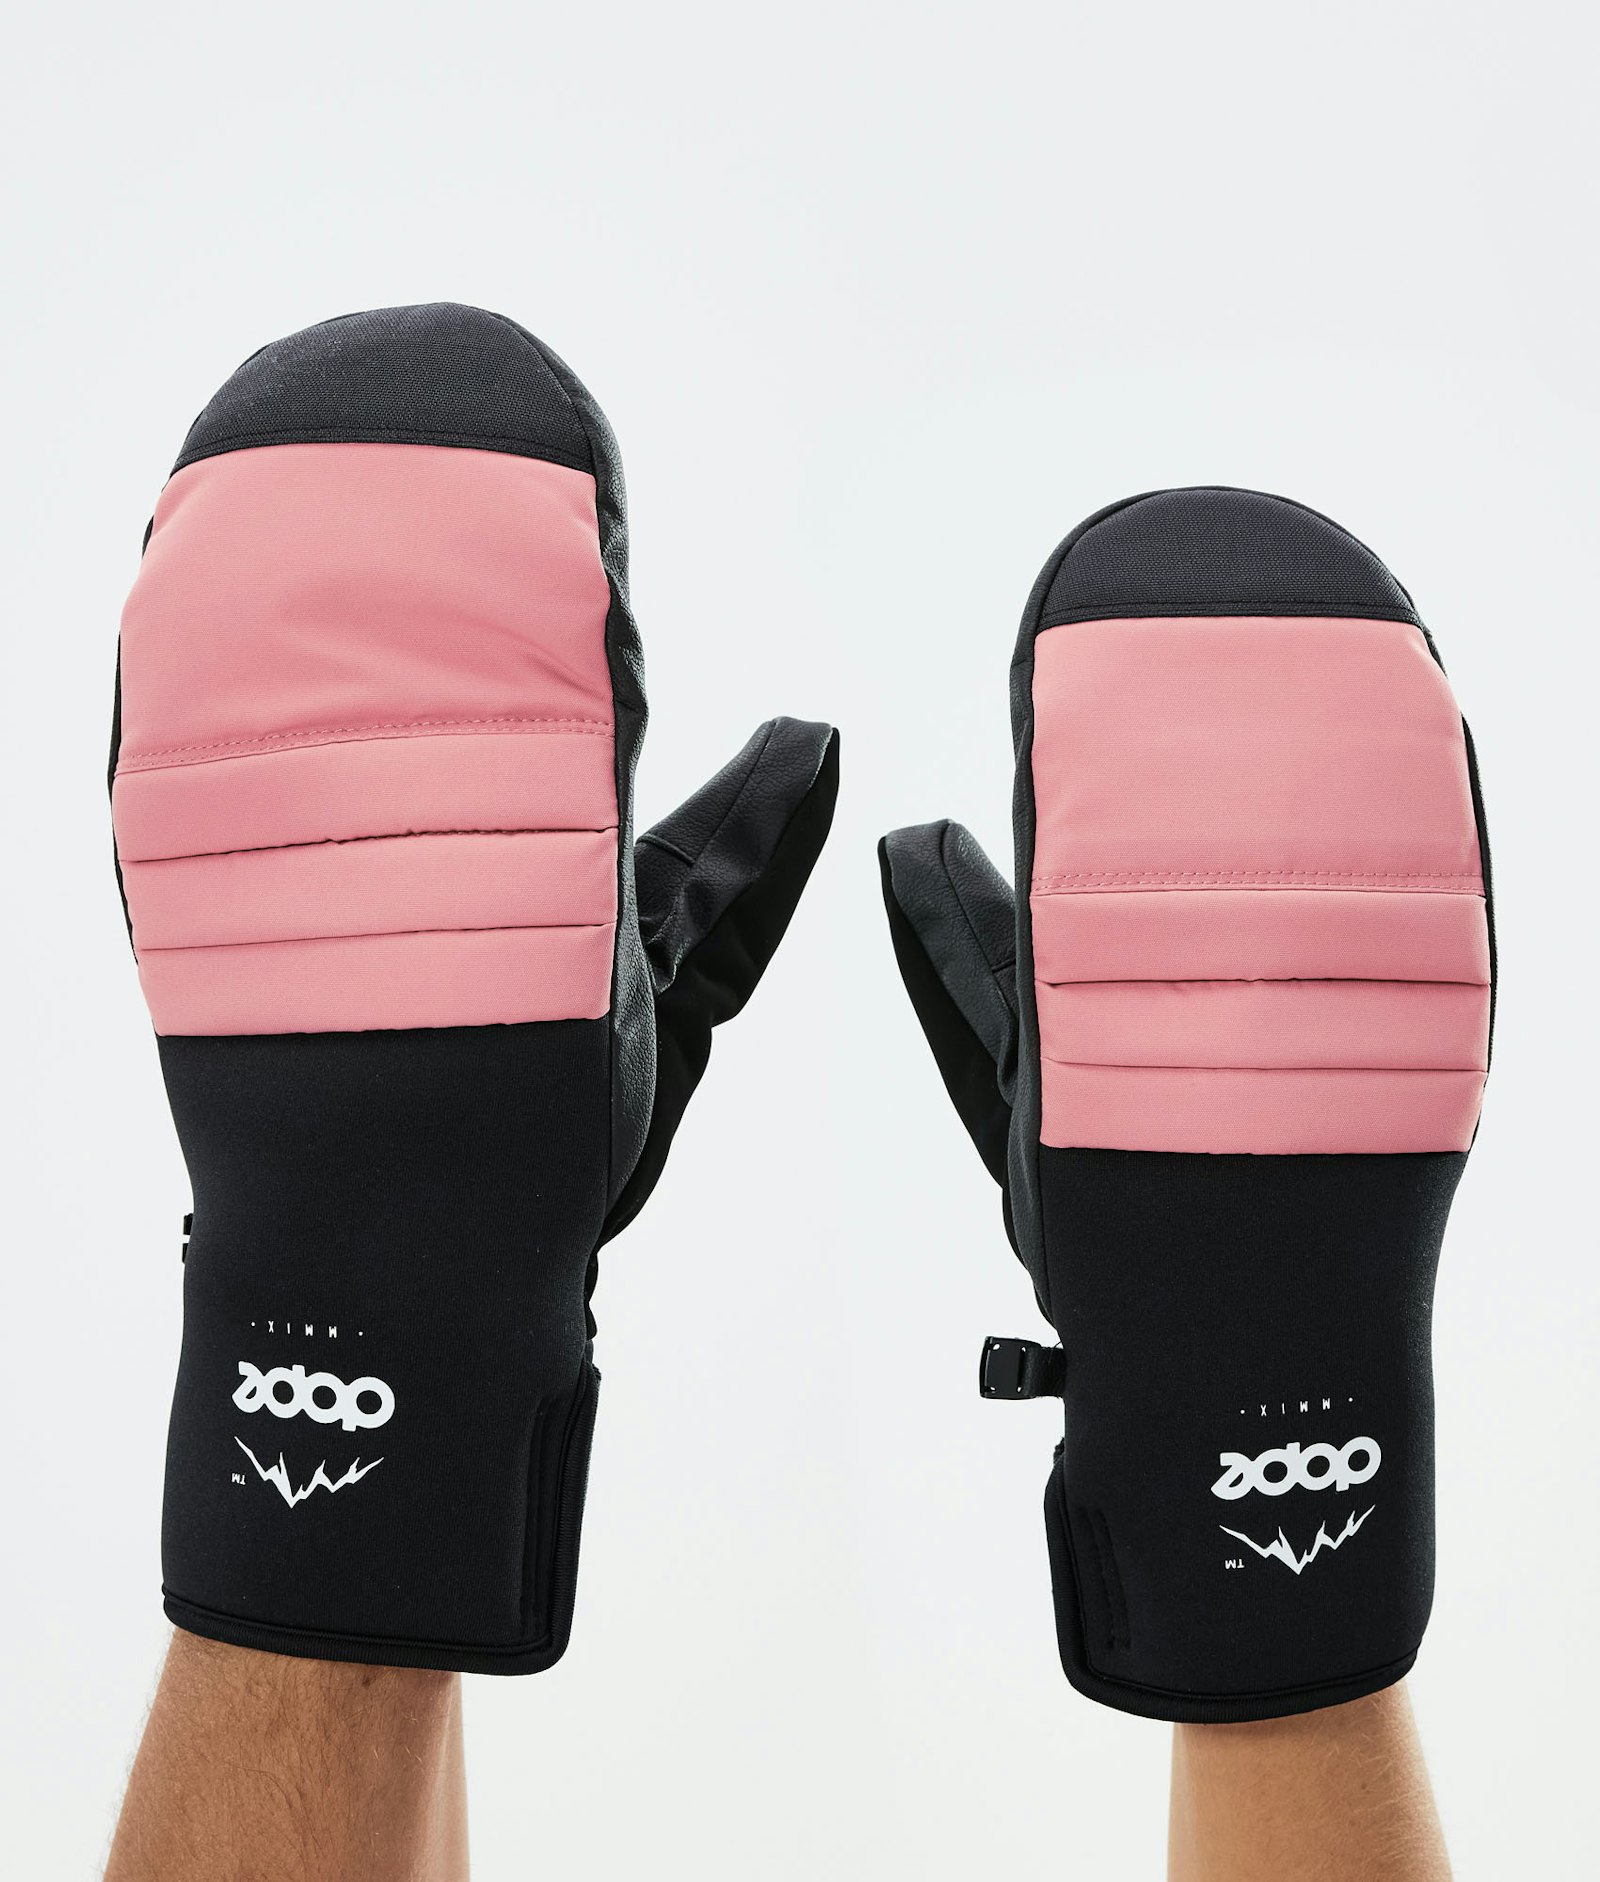 Dope Ace 2021 Snow Mittens Pink, Image 1 of 6